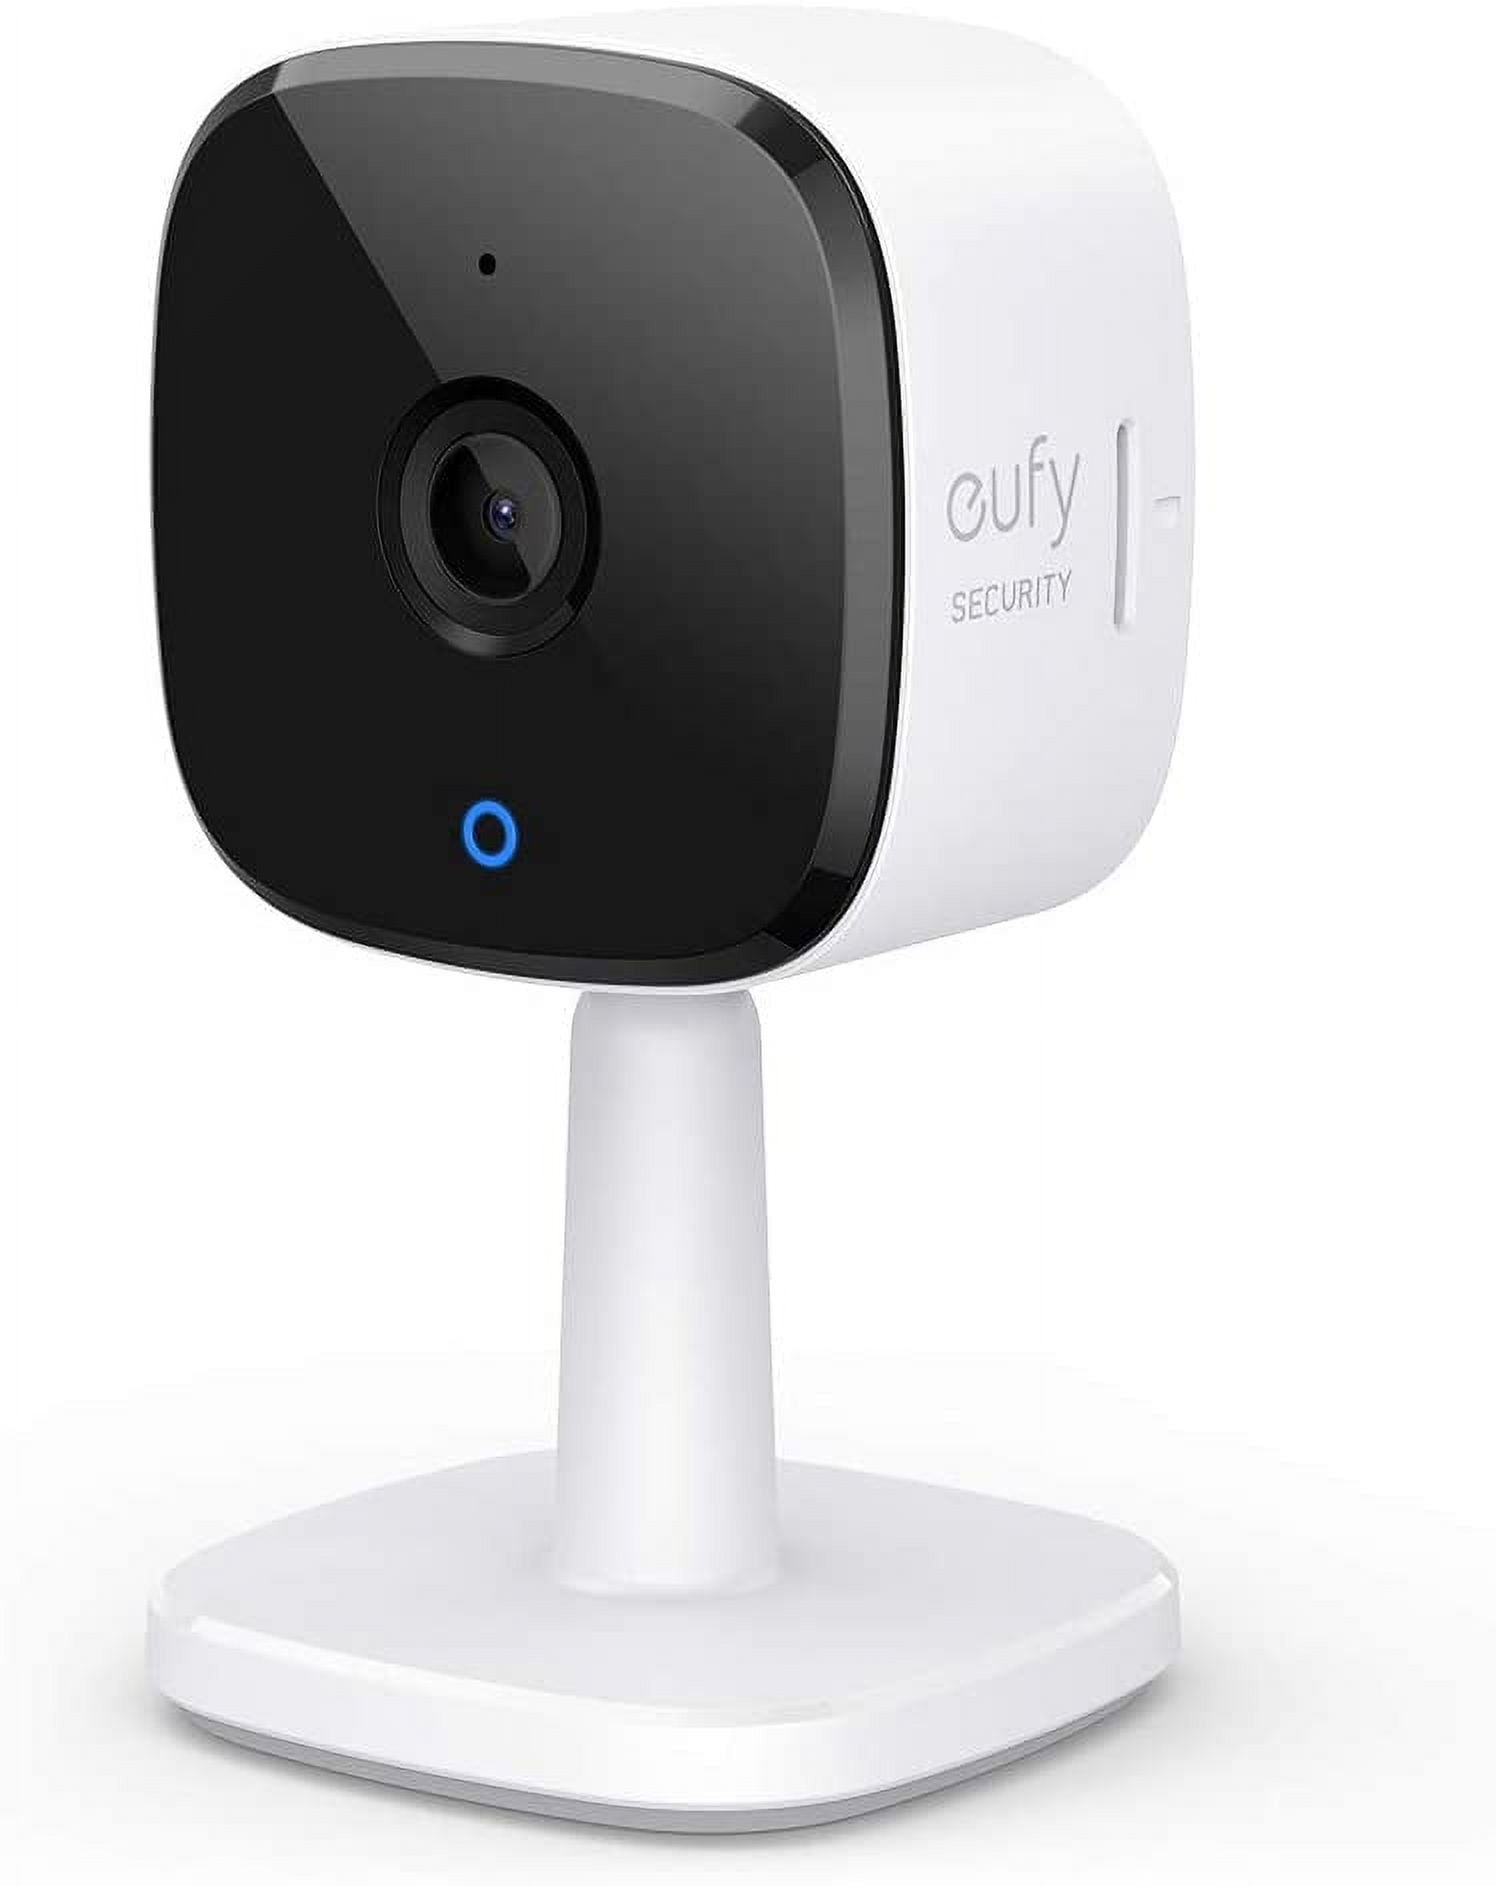 Eufy's new dual-lens security cameras can use AI to stitch